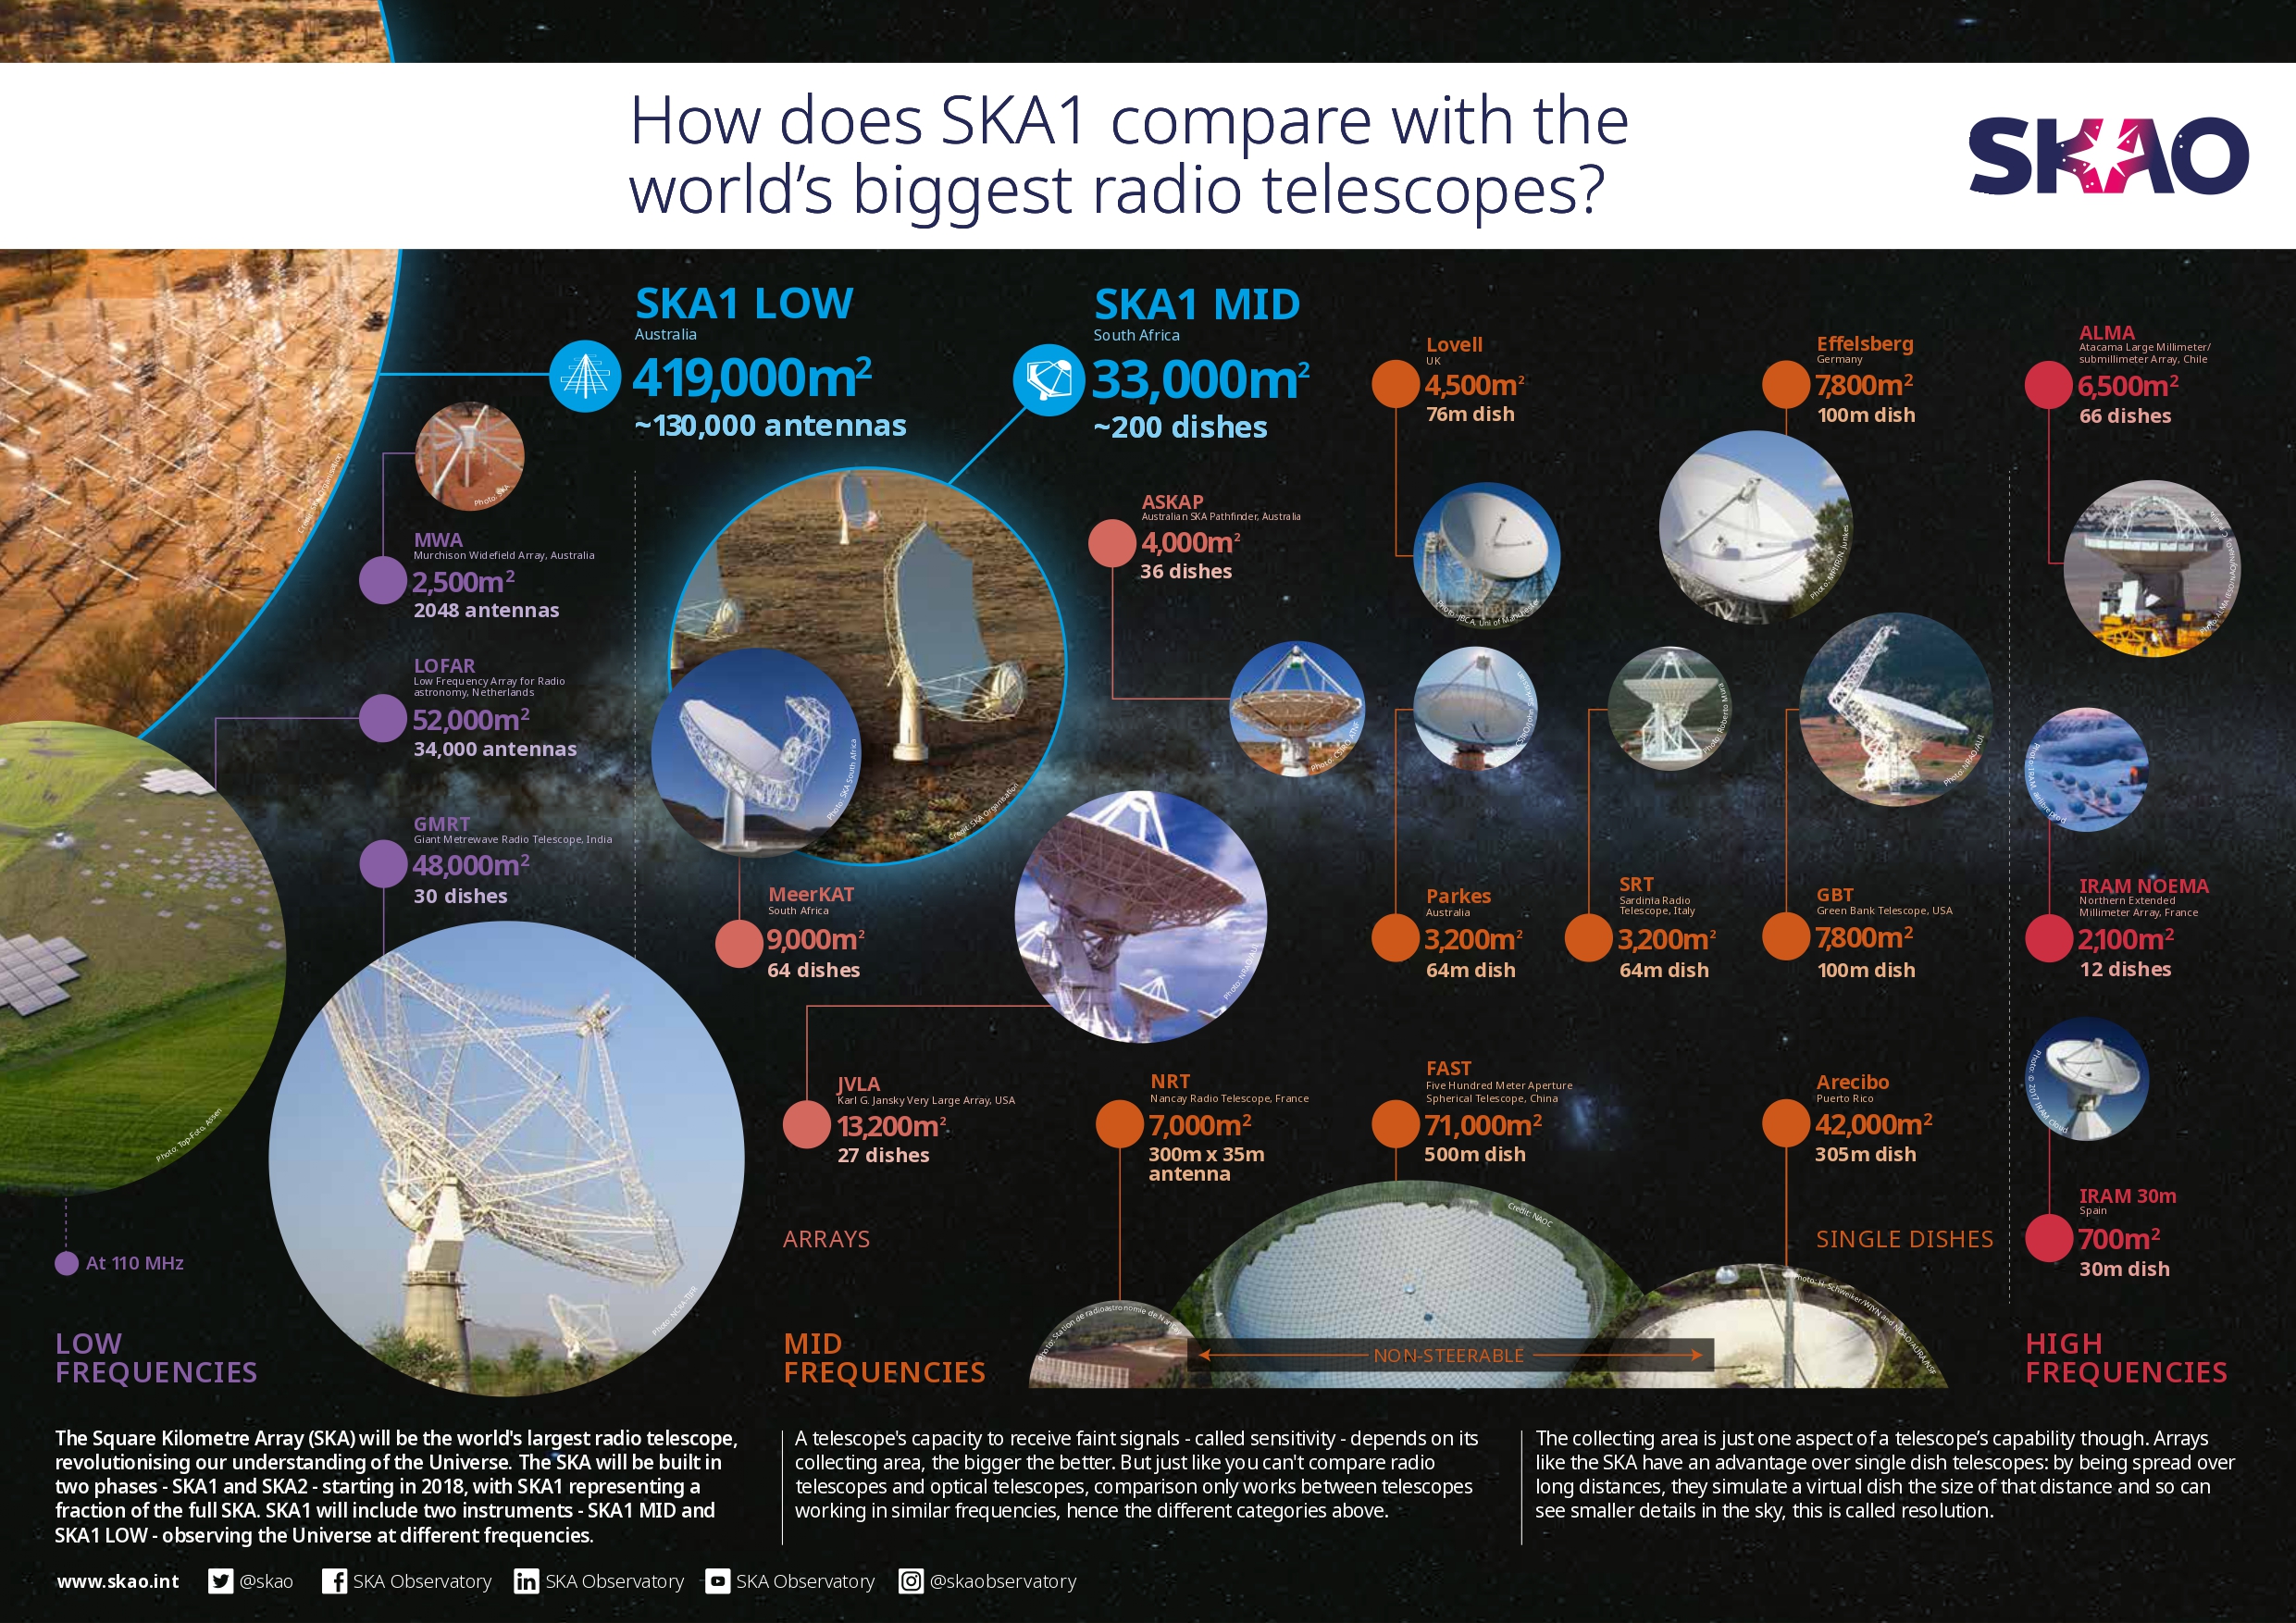 Infographic displaying some of the largest telescopes in the world, showing just how big the SKAO will be compared to other telescopes.